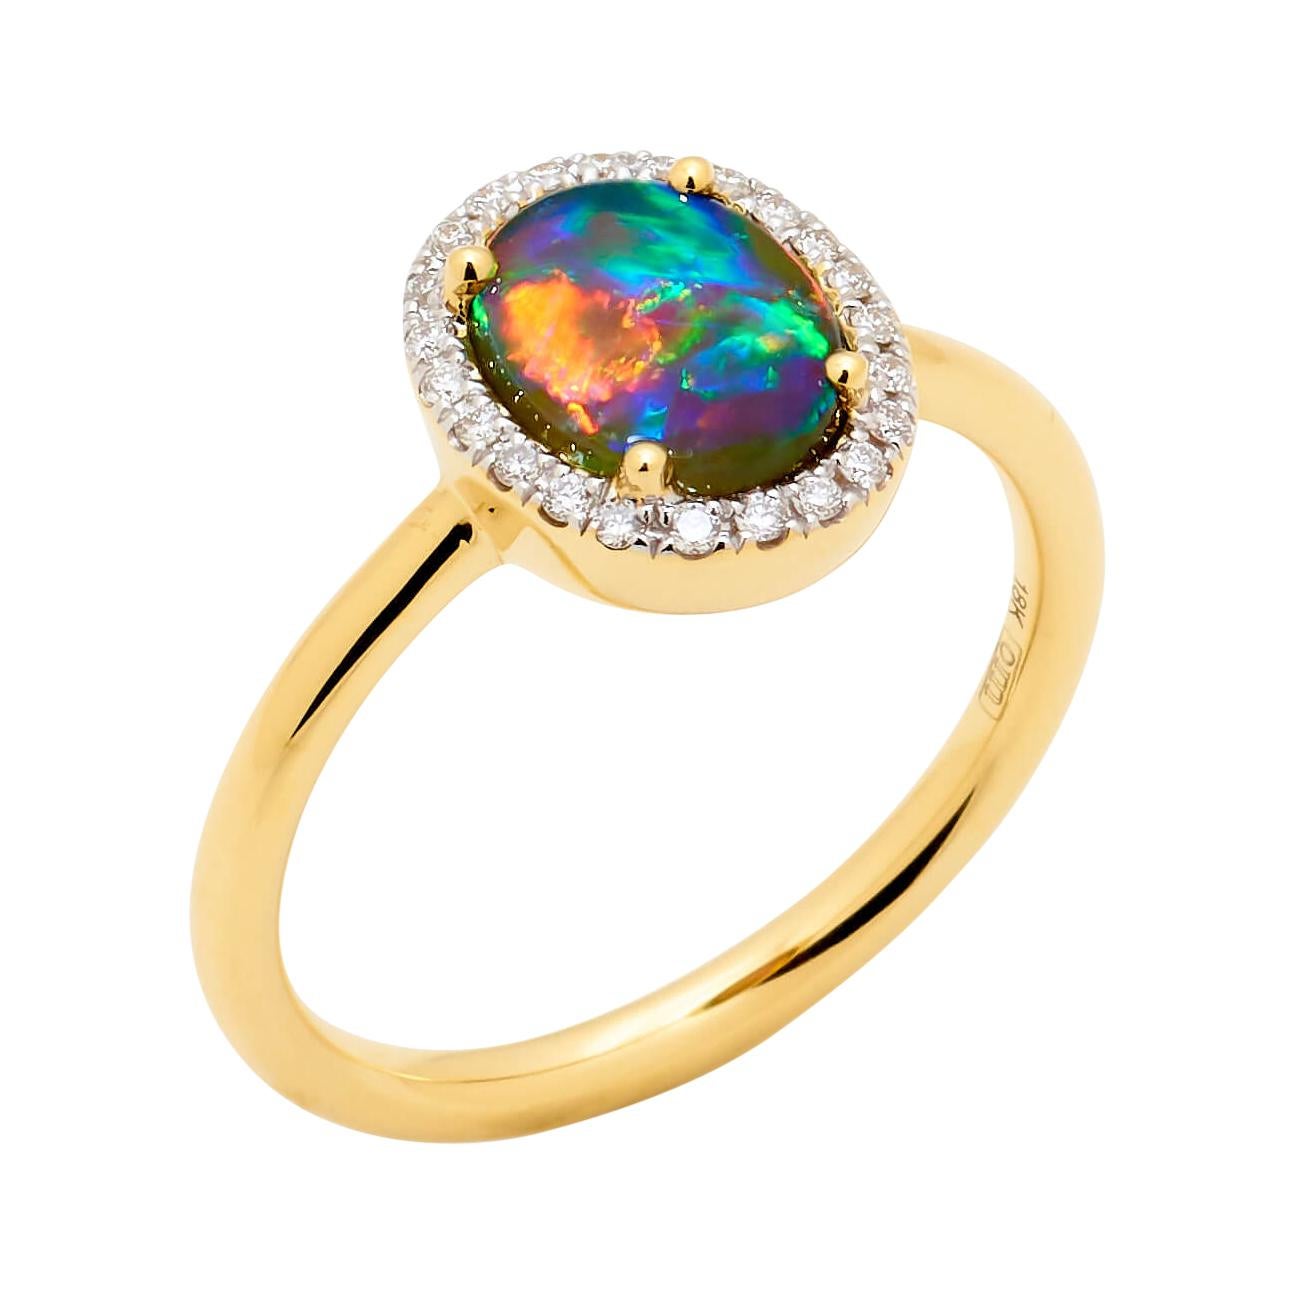 Natural Untreated Australian 1.29ct Black Opal Ring in 18k Yellow Gold